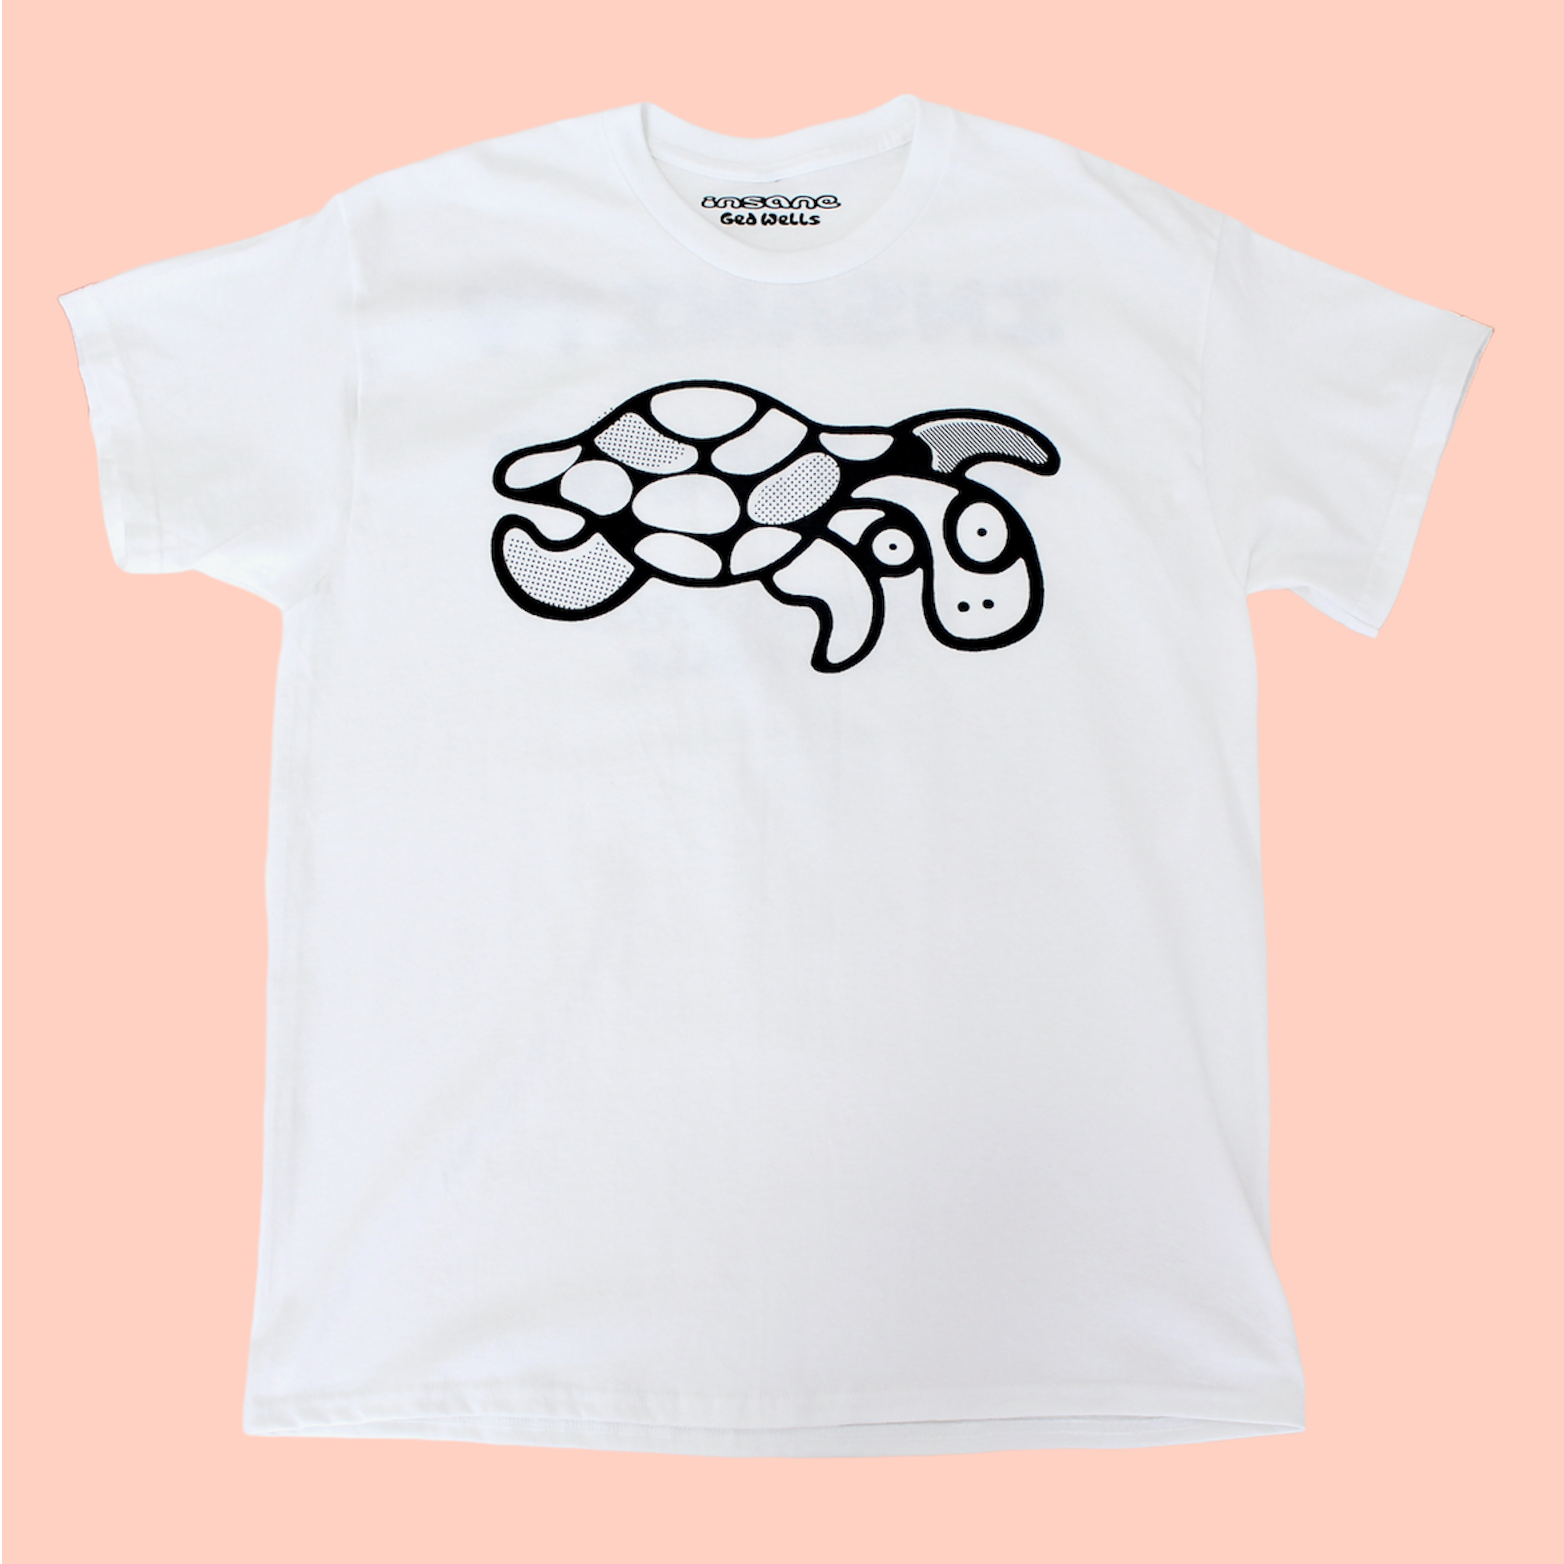 Ged Wells of insane／T-shirt 'Turtle' | WISH LESS store